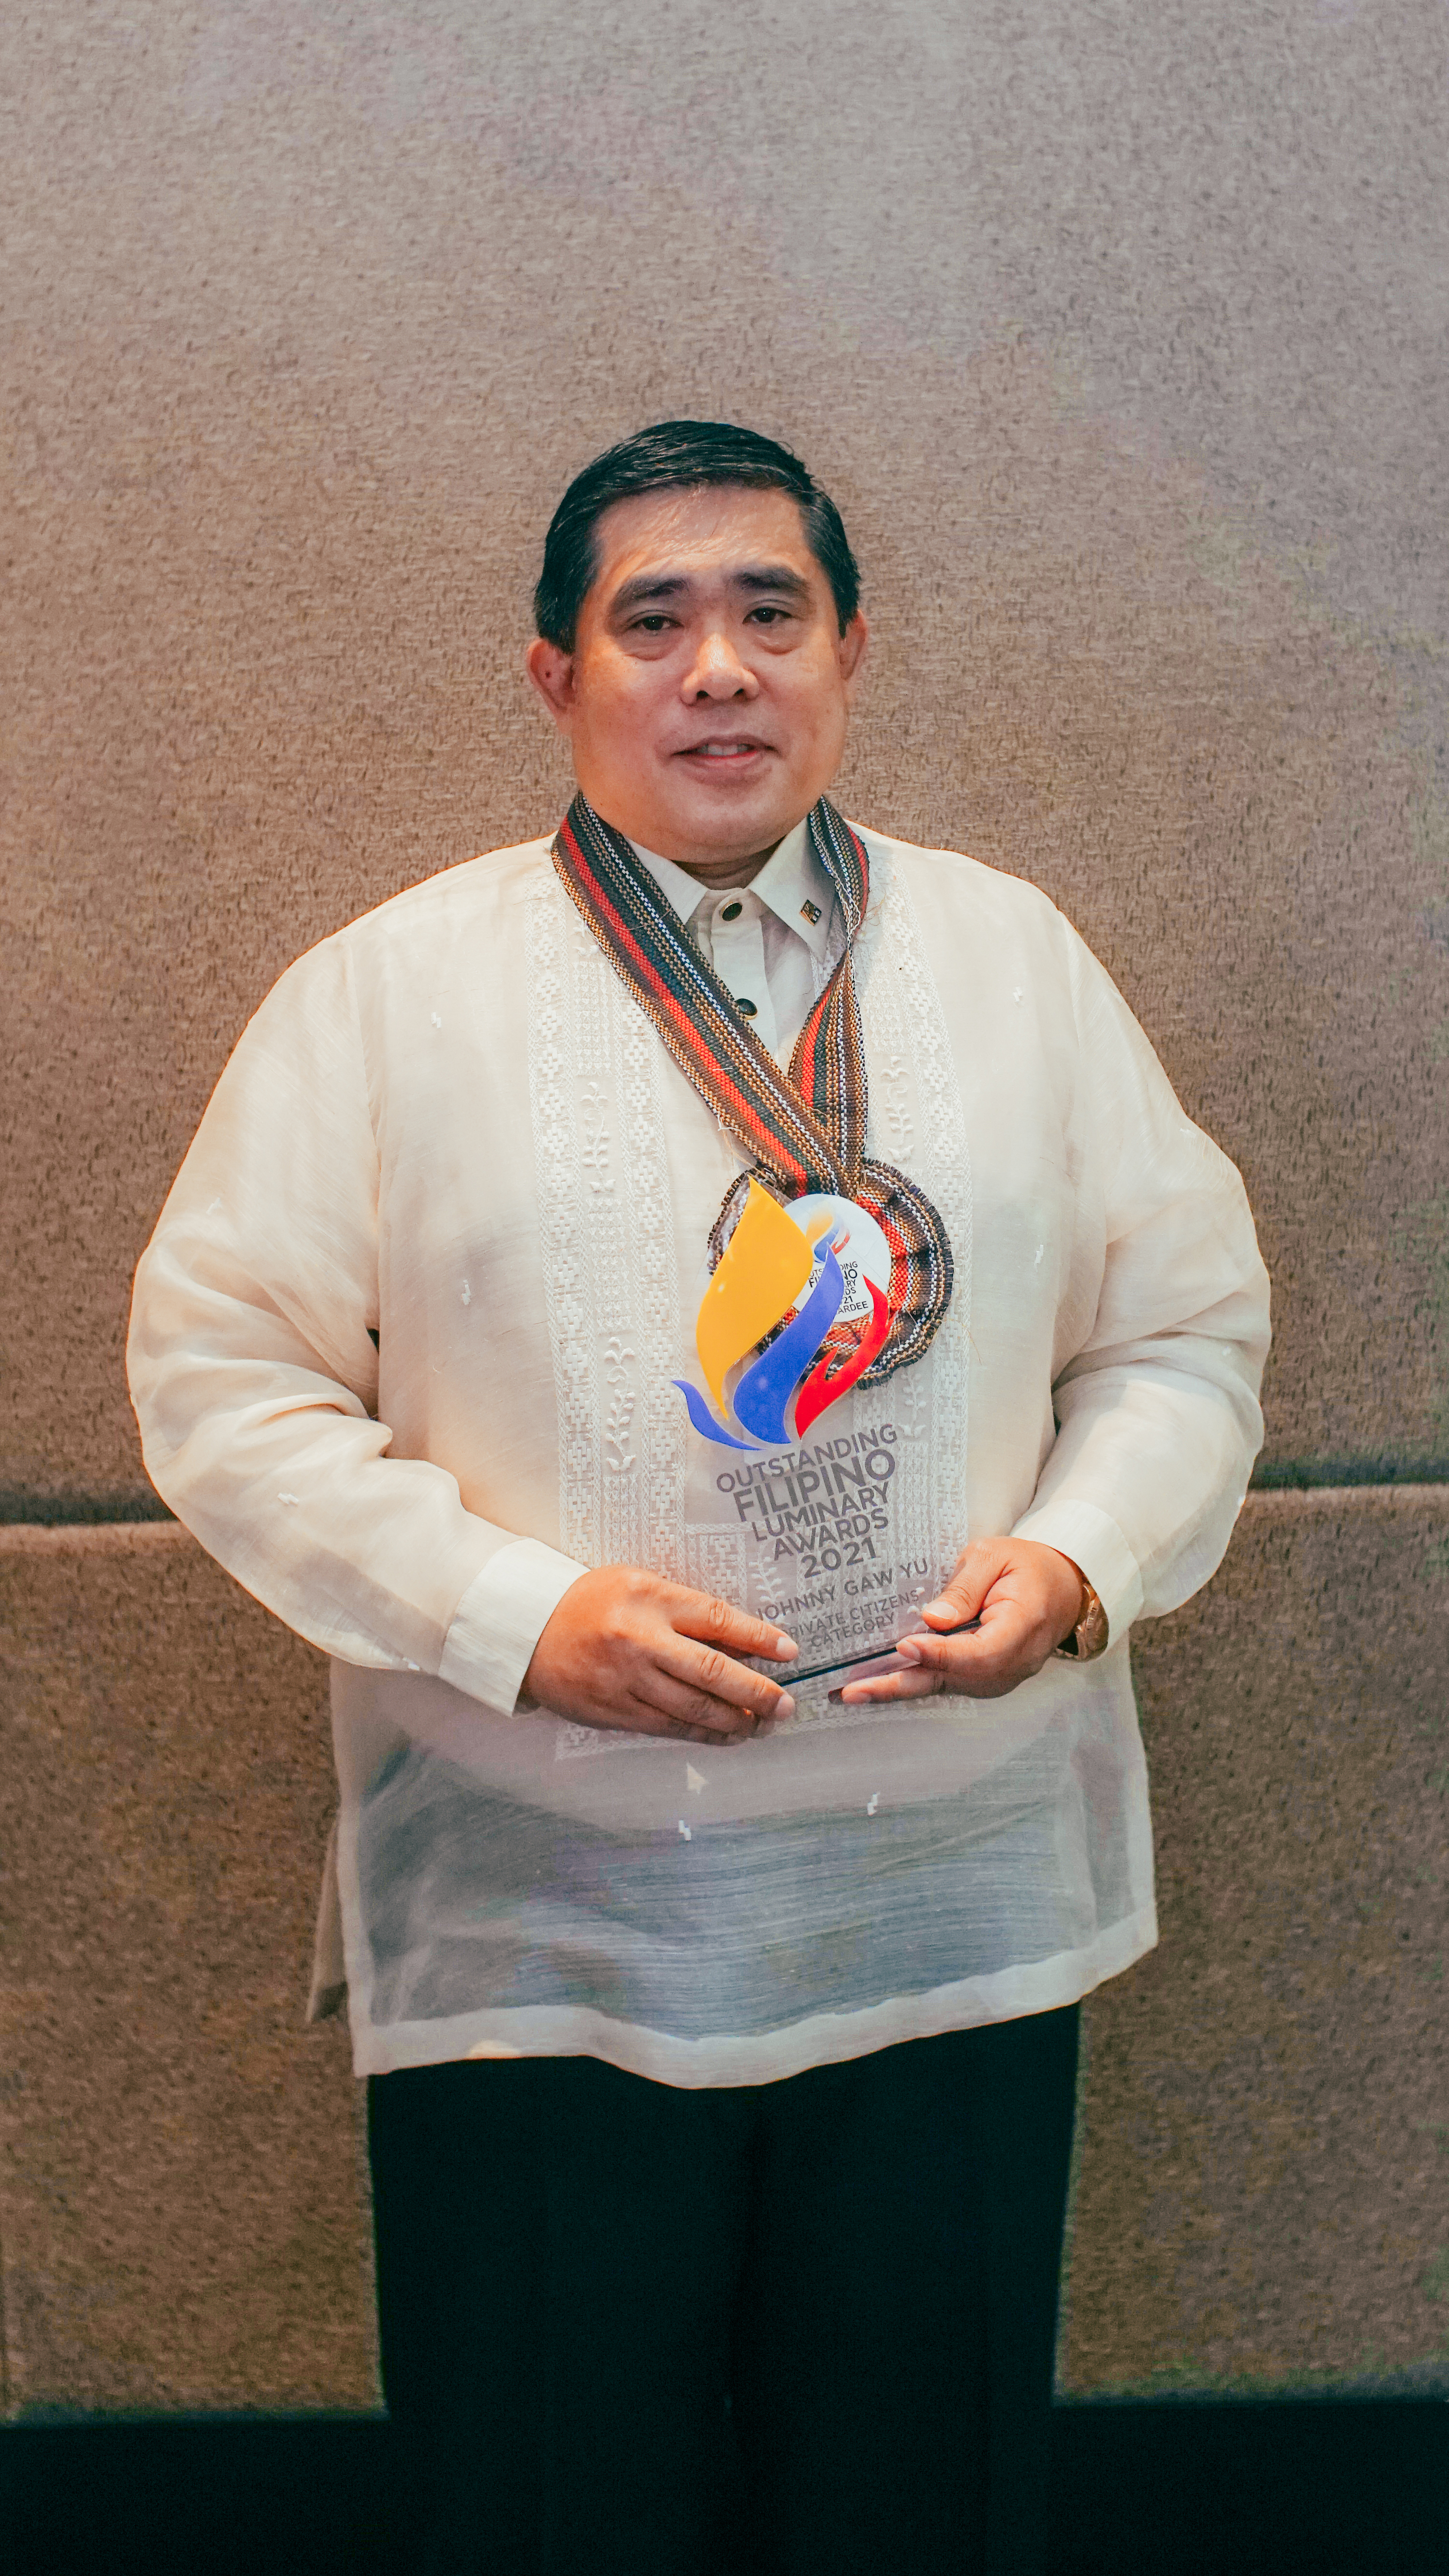 Johnny Gaw Yu Receives Golden Globe Annual Award for Outstanding Filipino Achiever